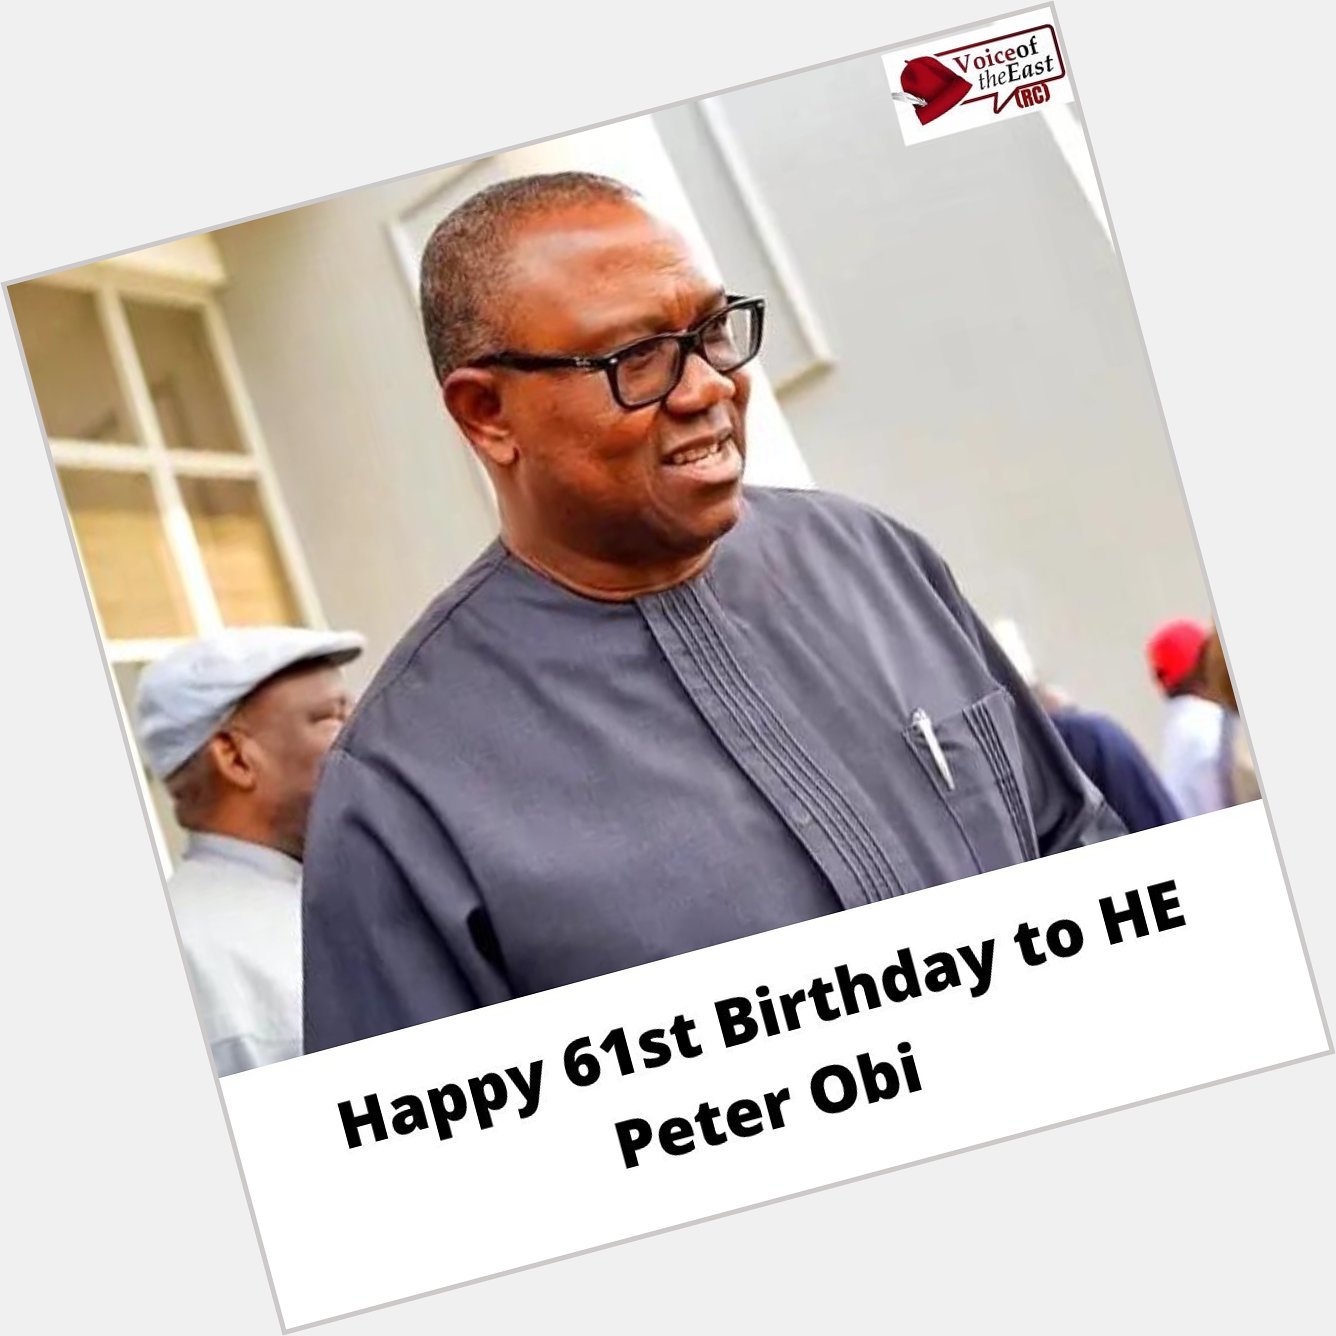 If you love Peter Obi, gather here

Happy birthday Your Excellency 